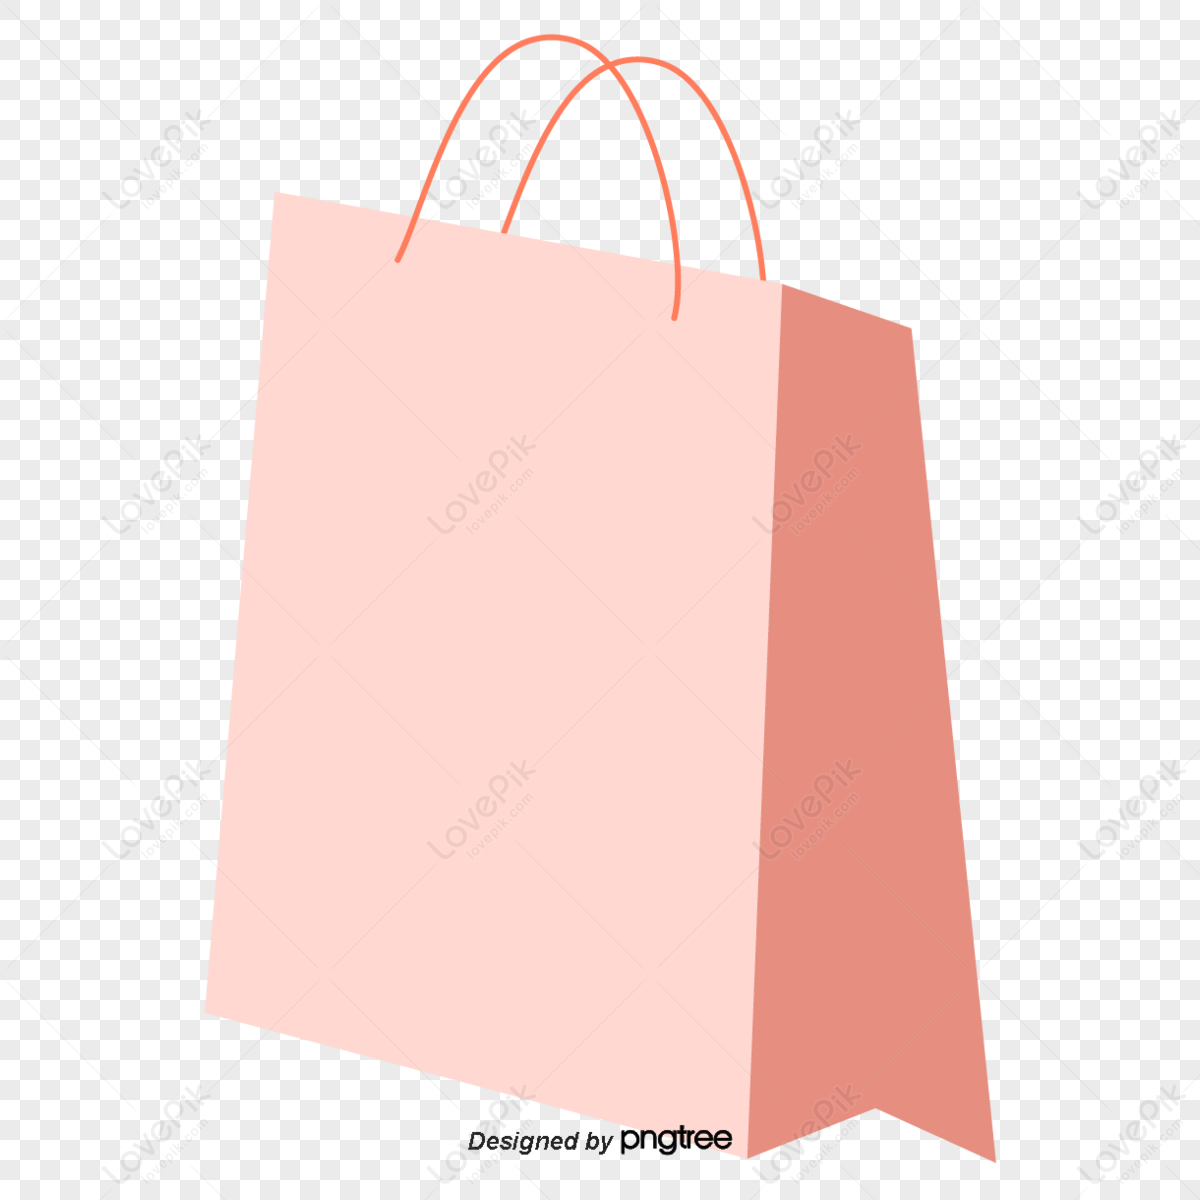 Pink Shopping Bag PNG Images With Transparent Background | Free ...